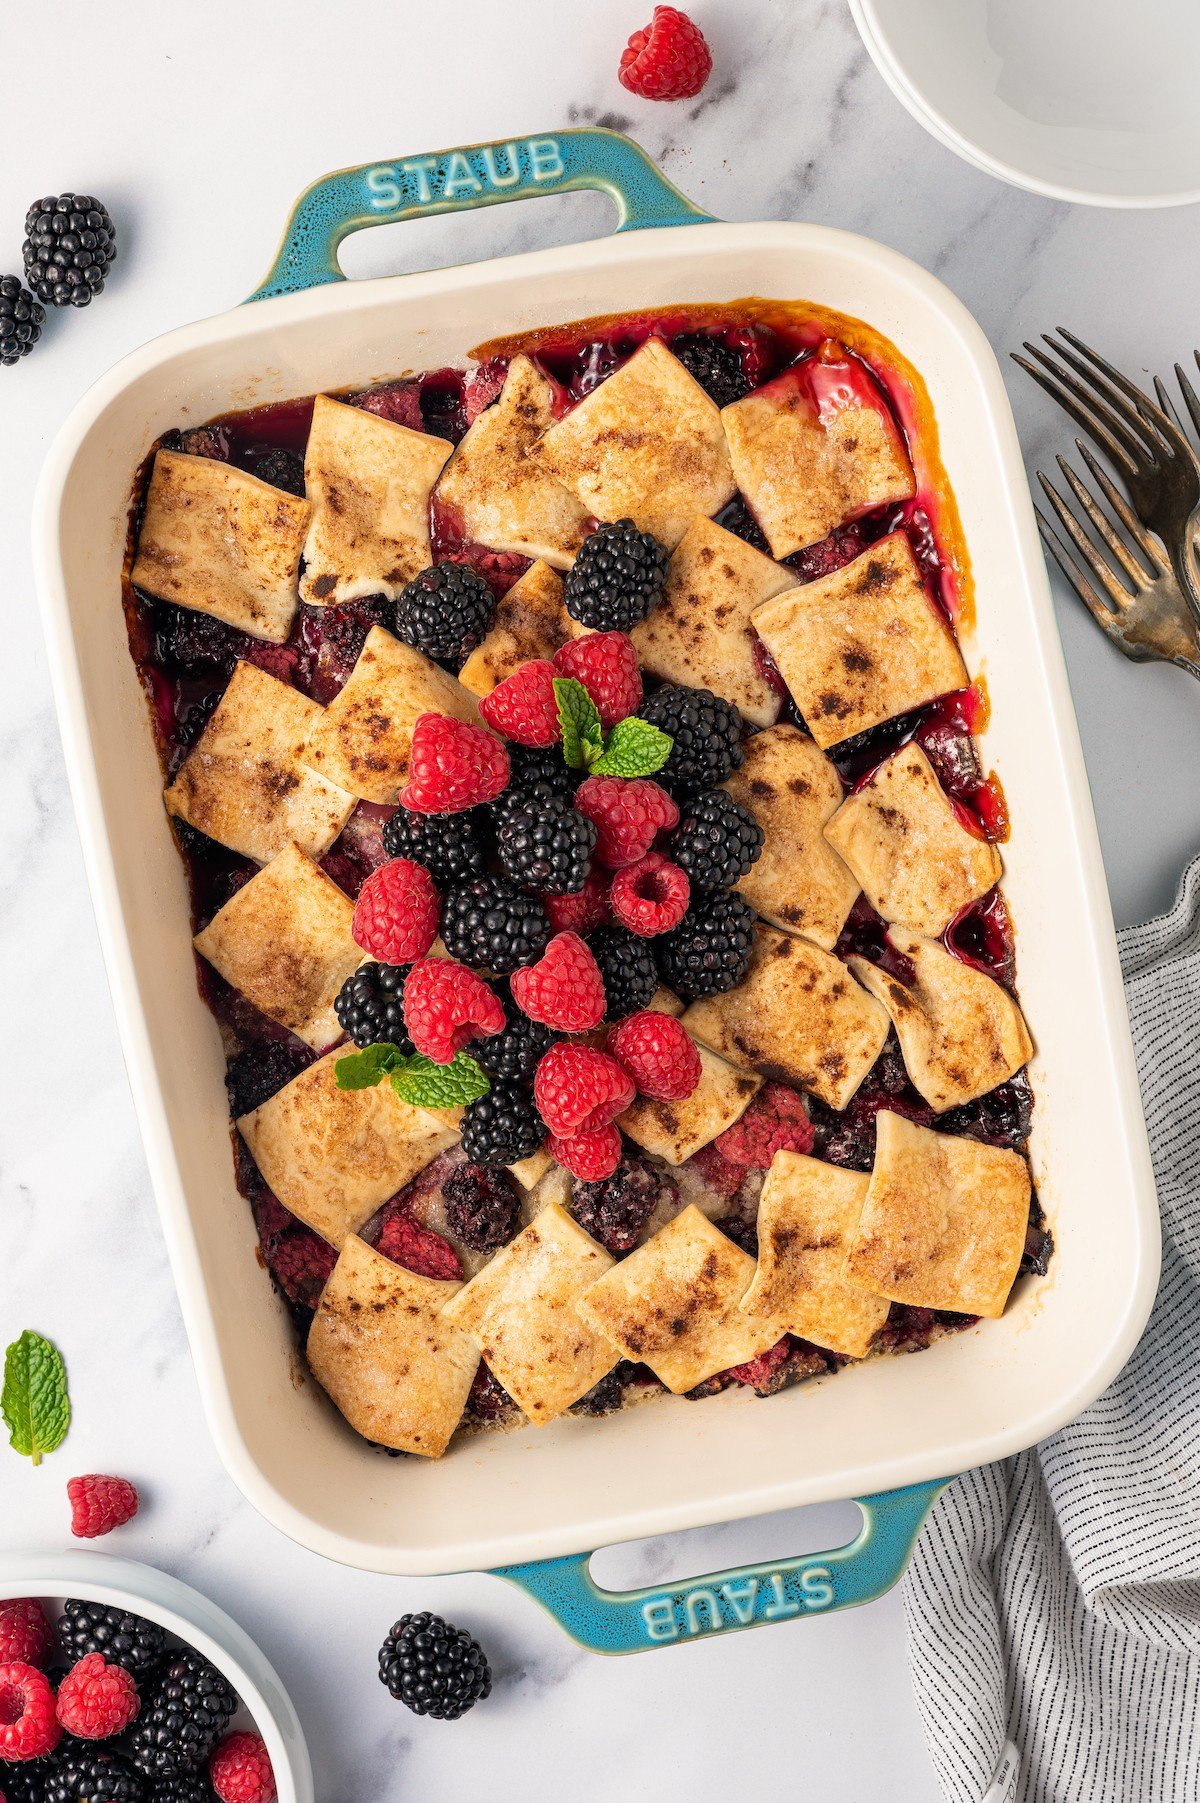 Cooked berry cobbler in a casserole dish with fresh berries on top.